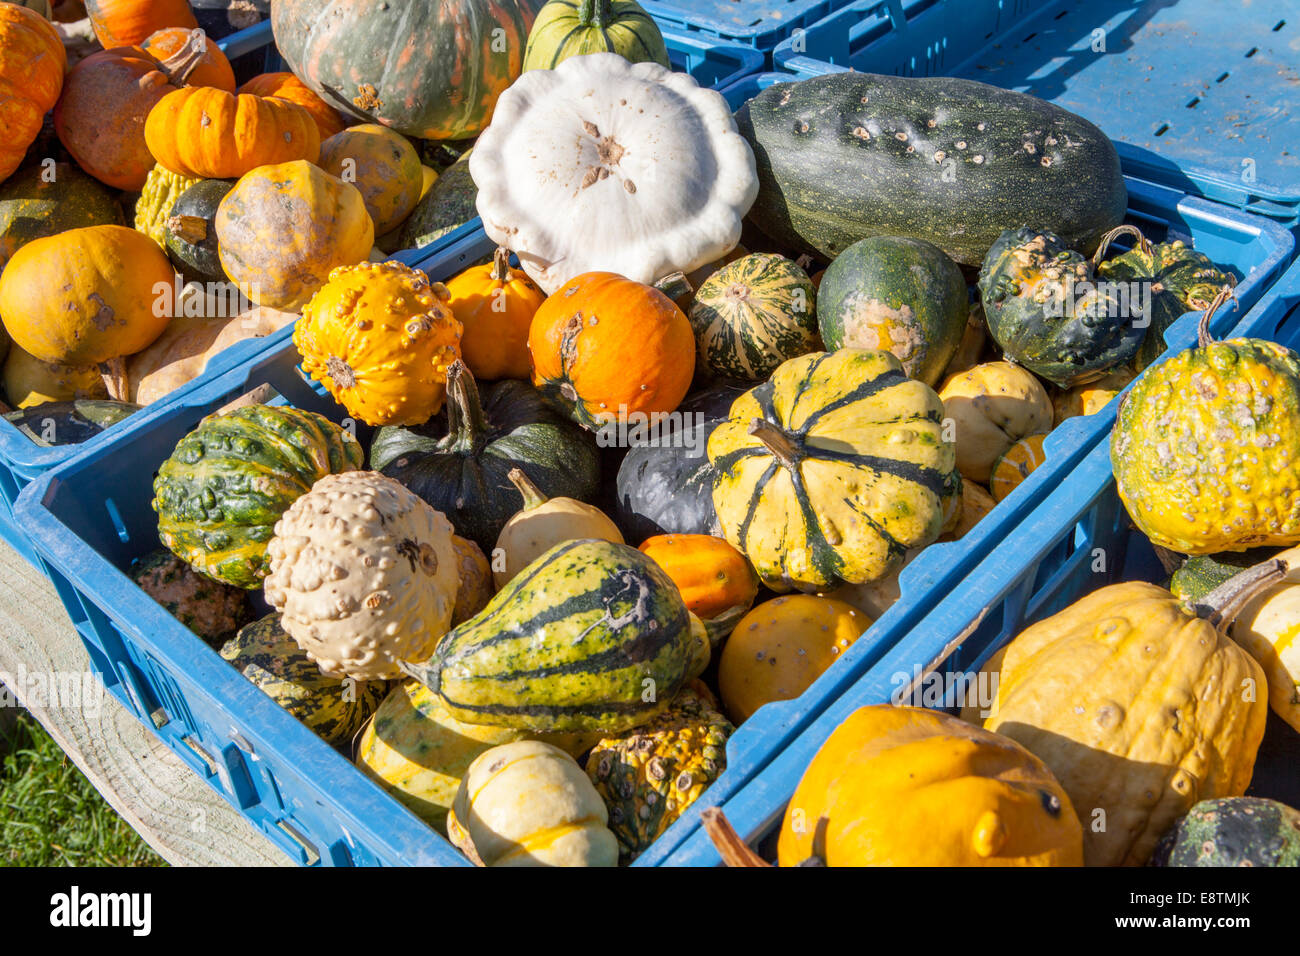 different marrows and squashes, pumpkins, for sale, Germany, Europe Stock Photo